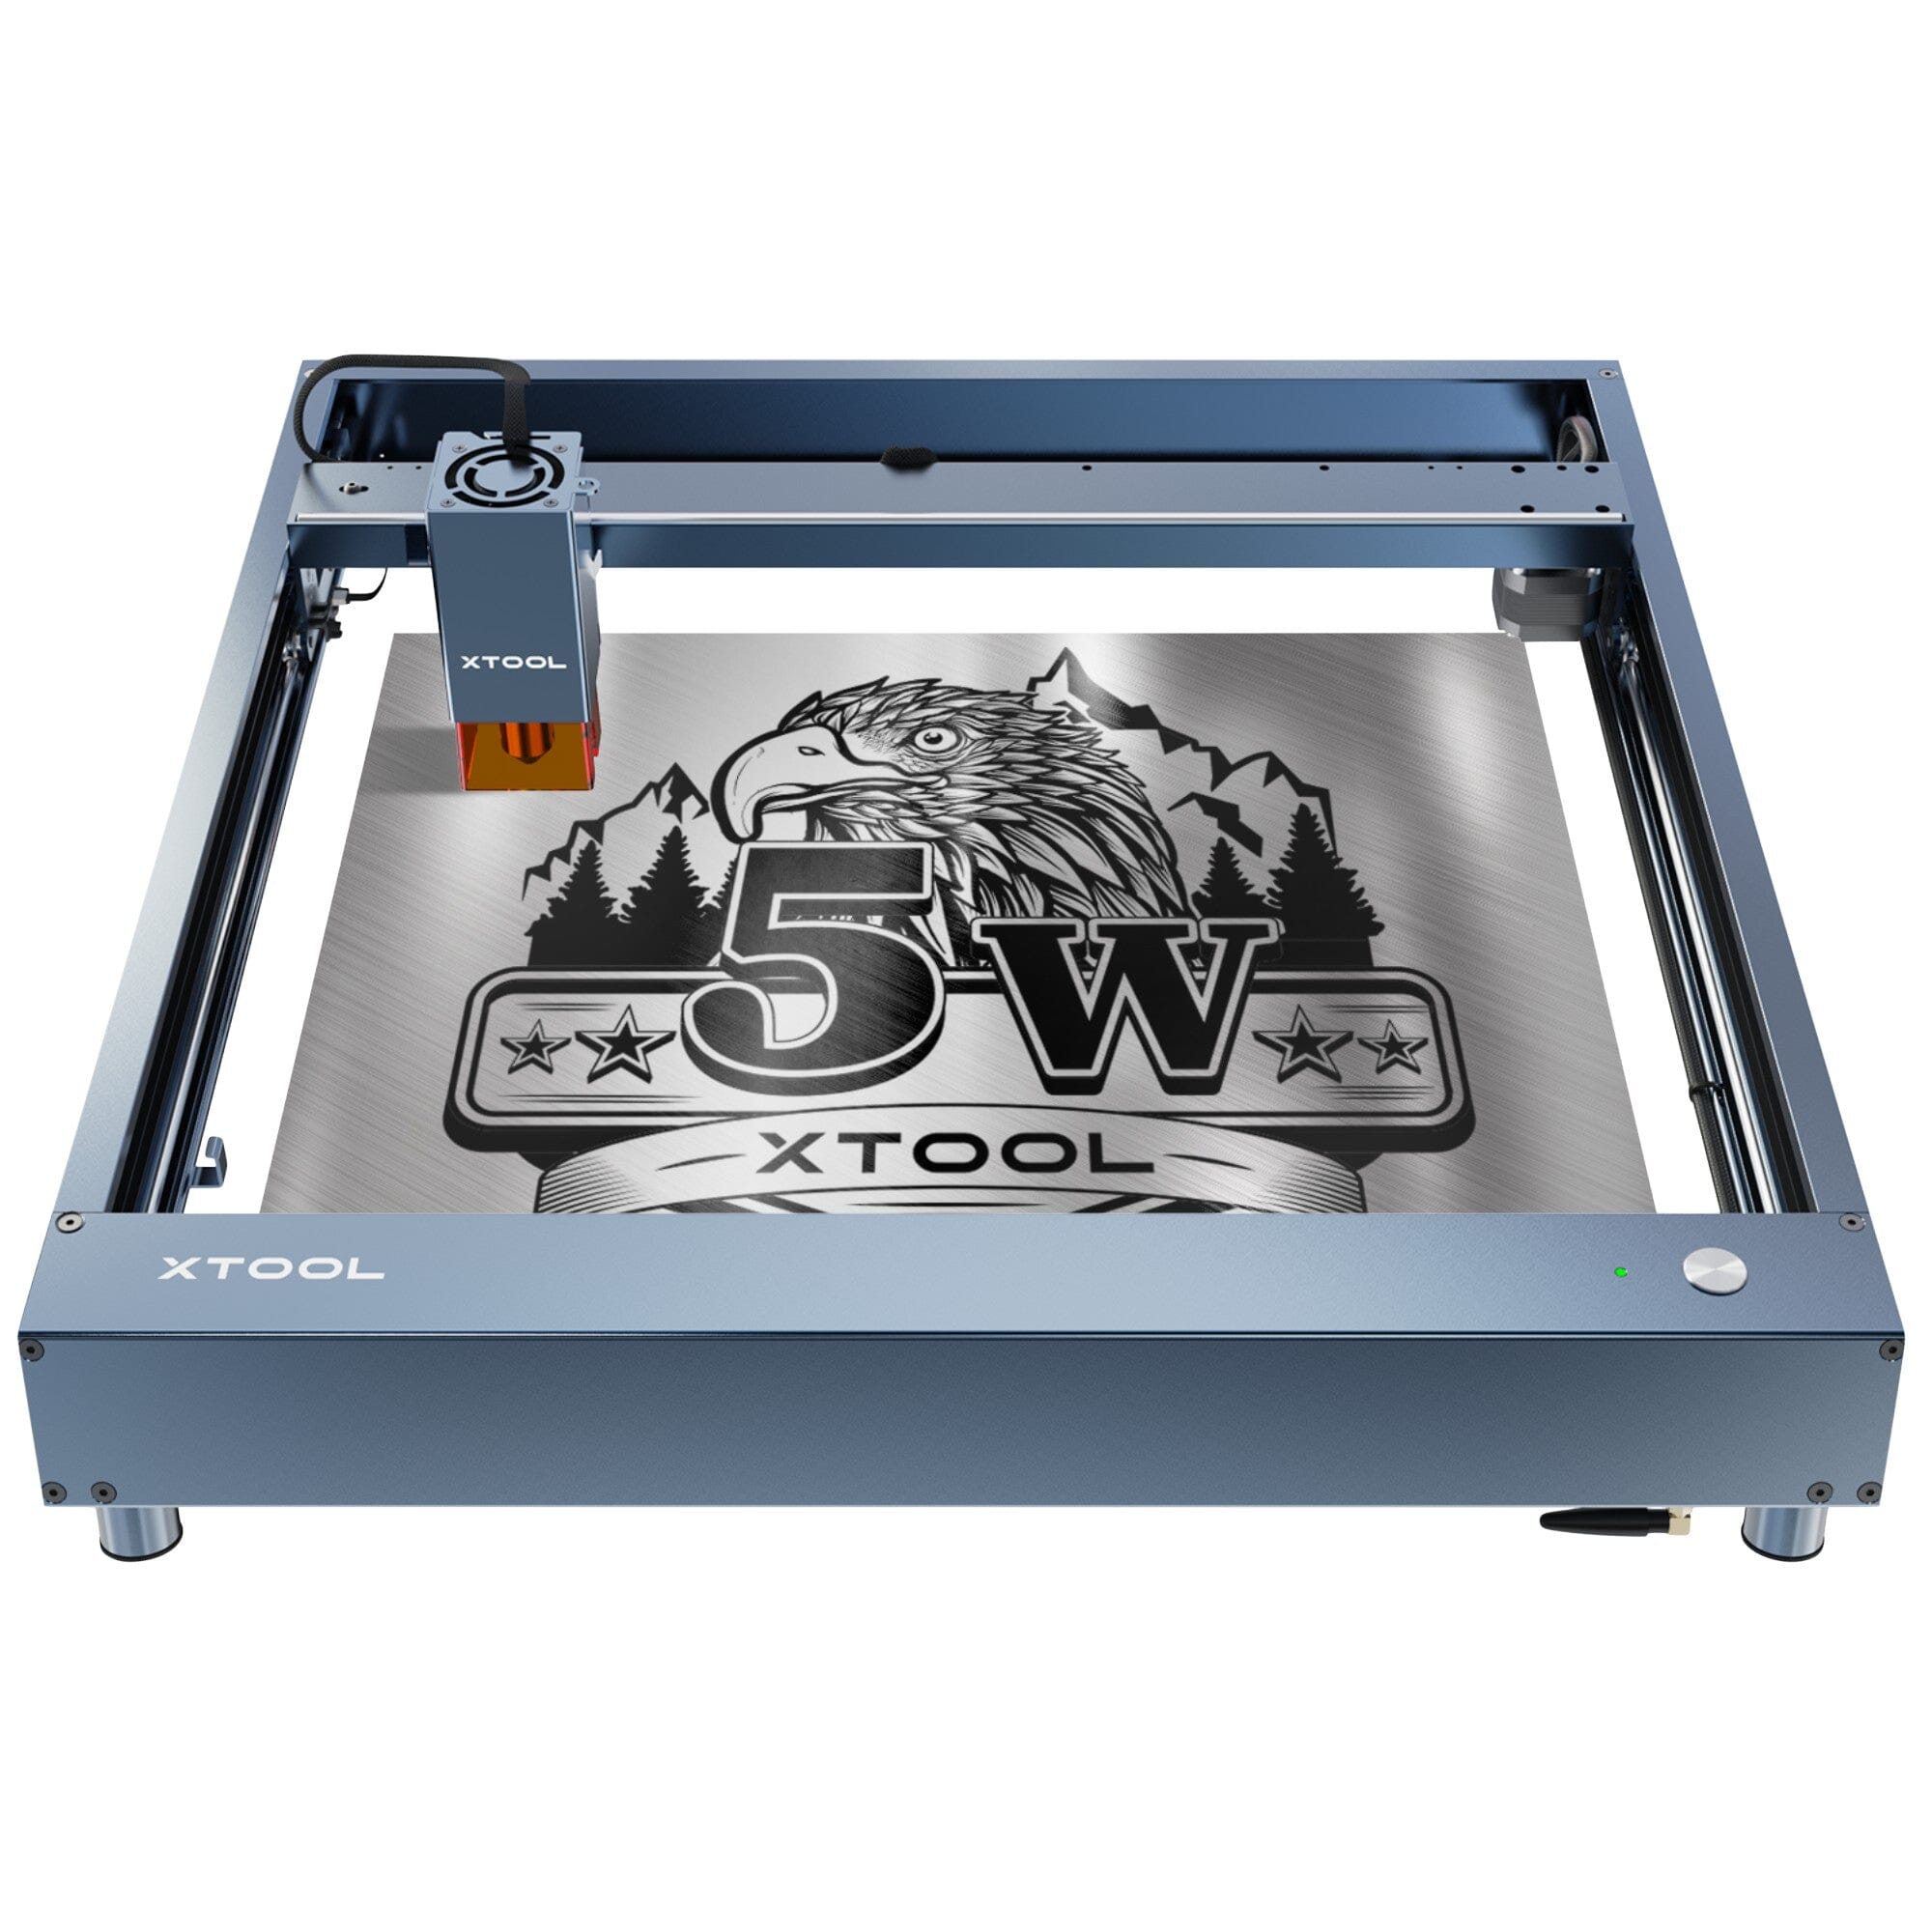 xTool D1 Pro 5W Laser Engraver, 36W Higher Accuracy Laser Engraving Machine